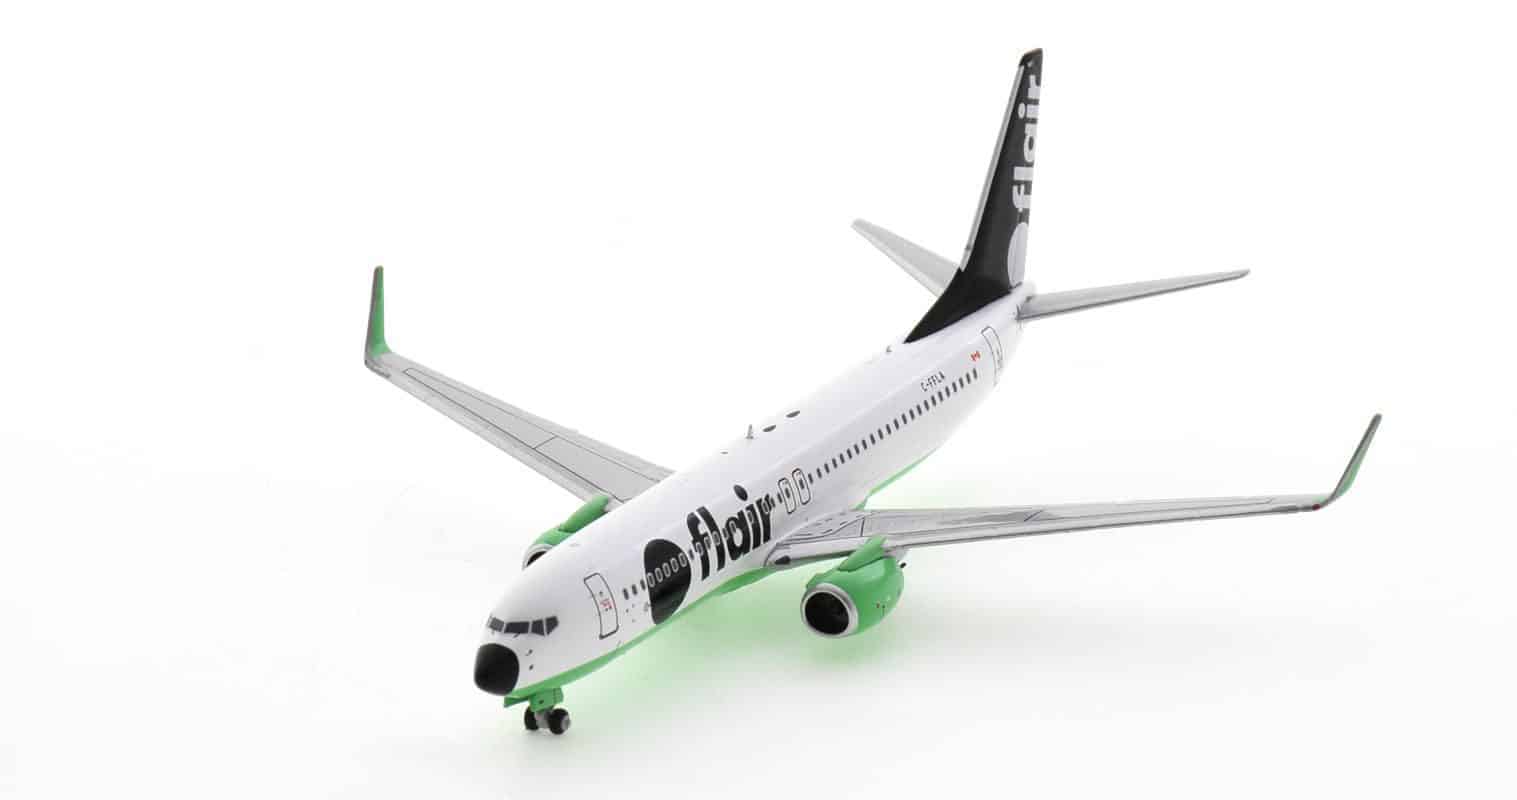 Front port side view of NG58113 - 1/200 scale diecast model Boeing 737-800, registration C-FFLA, in Flair Airline's livery.